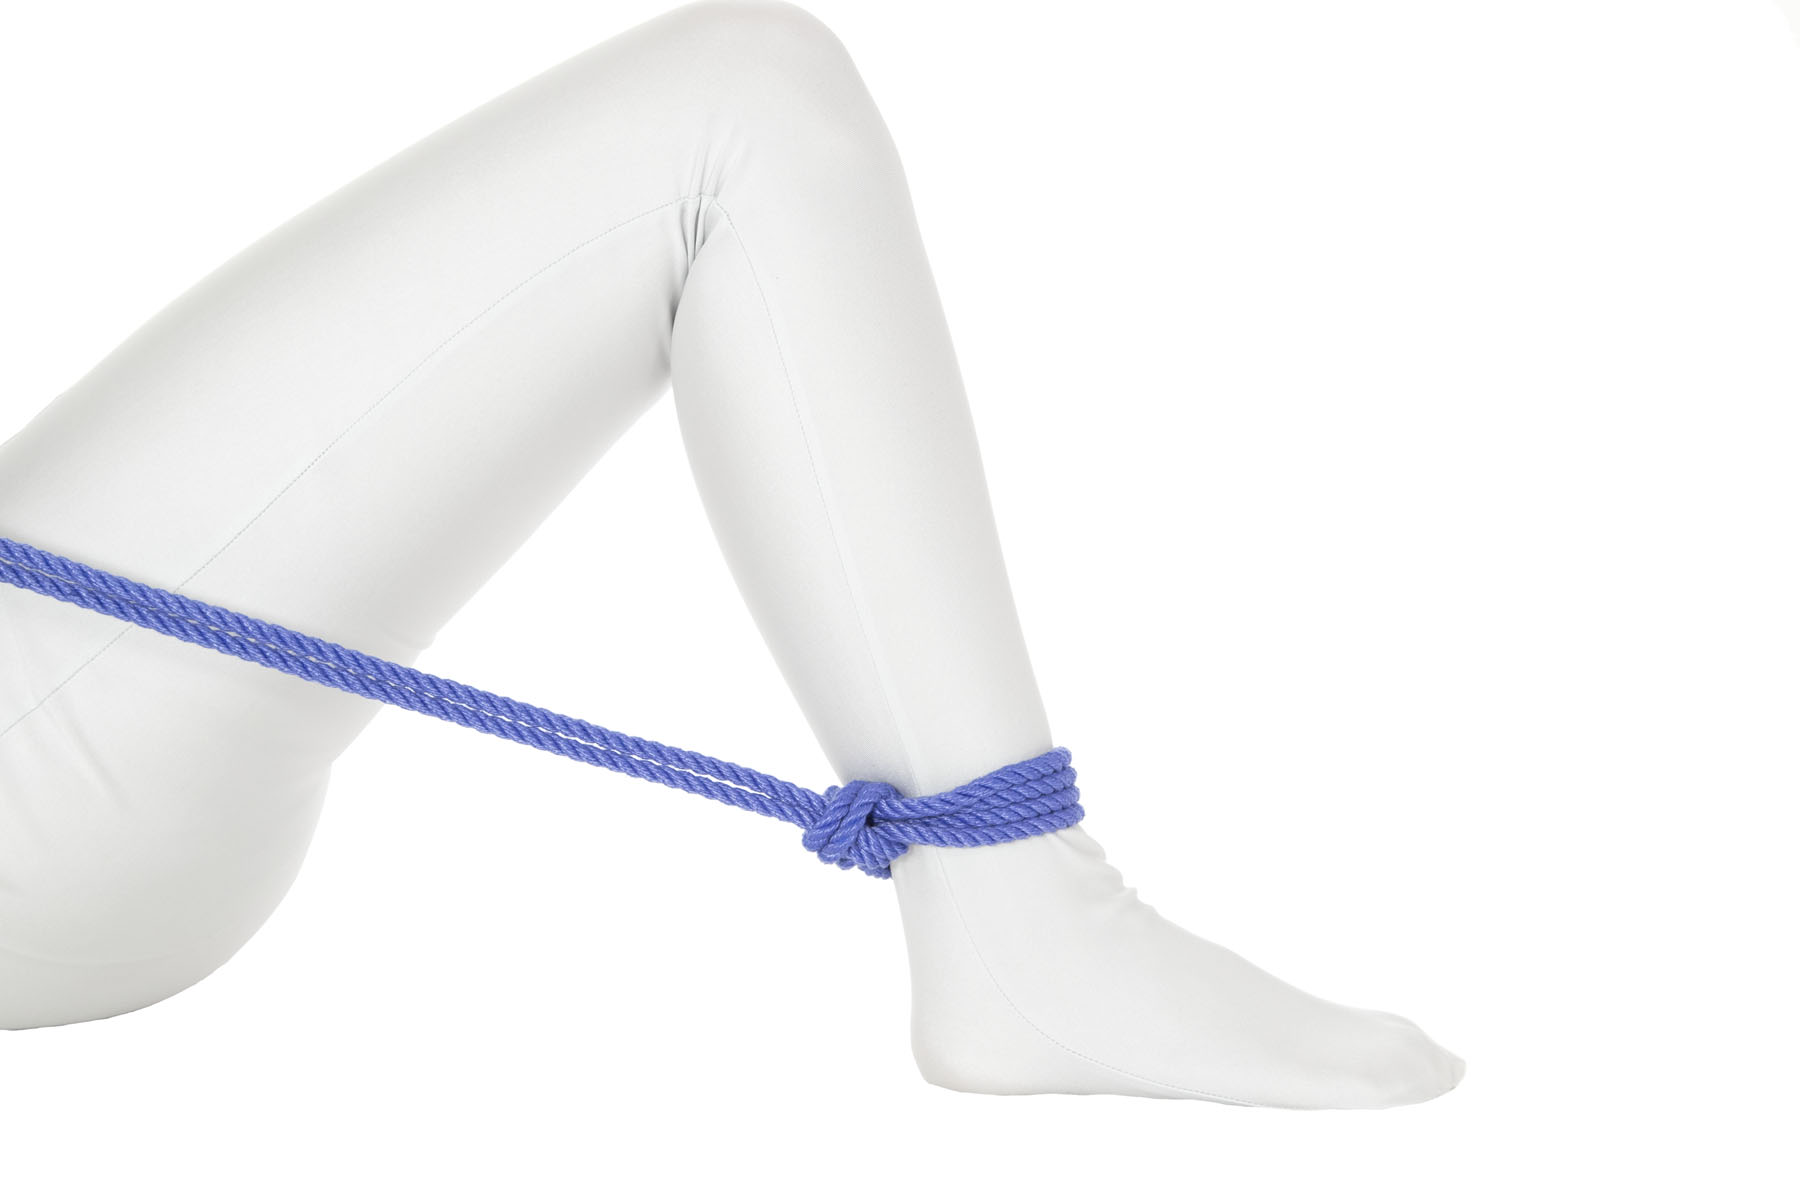 A person in a white bodysuit is lying on their back. Their right leg is fully bent, with the foot flat on the ground and the knee pointing upward. A single column tie has been tied around the right ankle and the rope crosses over the right thigh just below the hip.